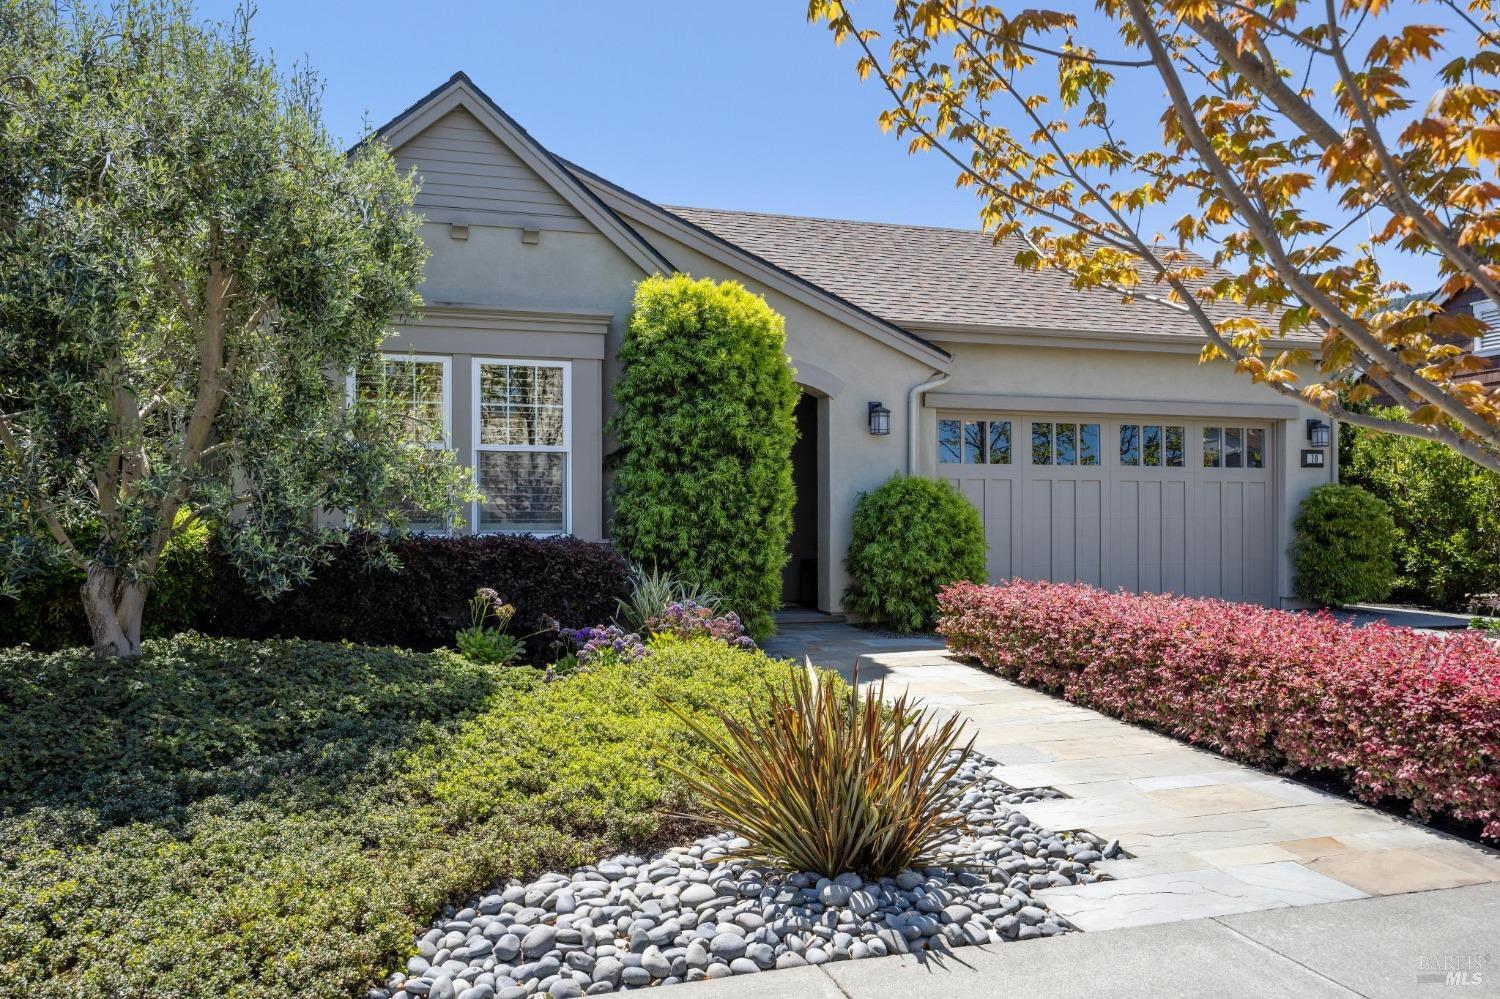 Photo of 10 Orchid Dr in Larkspur, CA